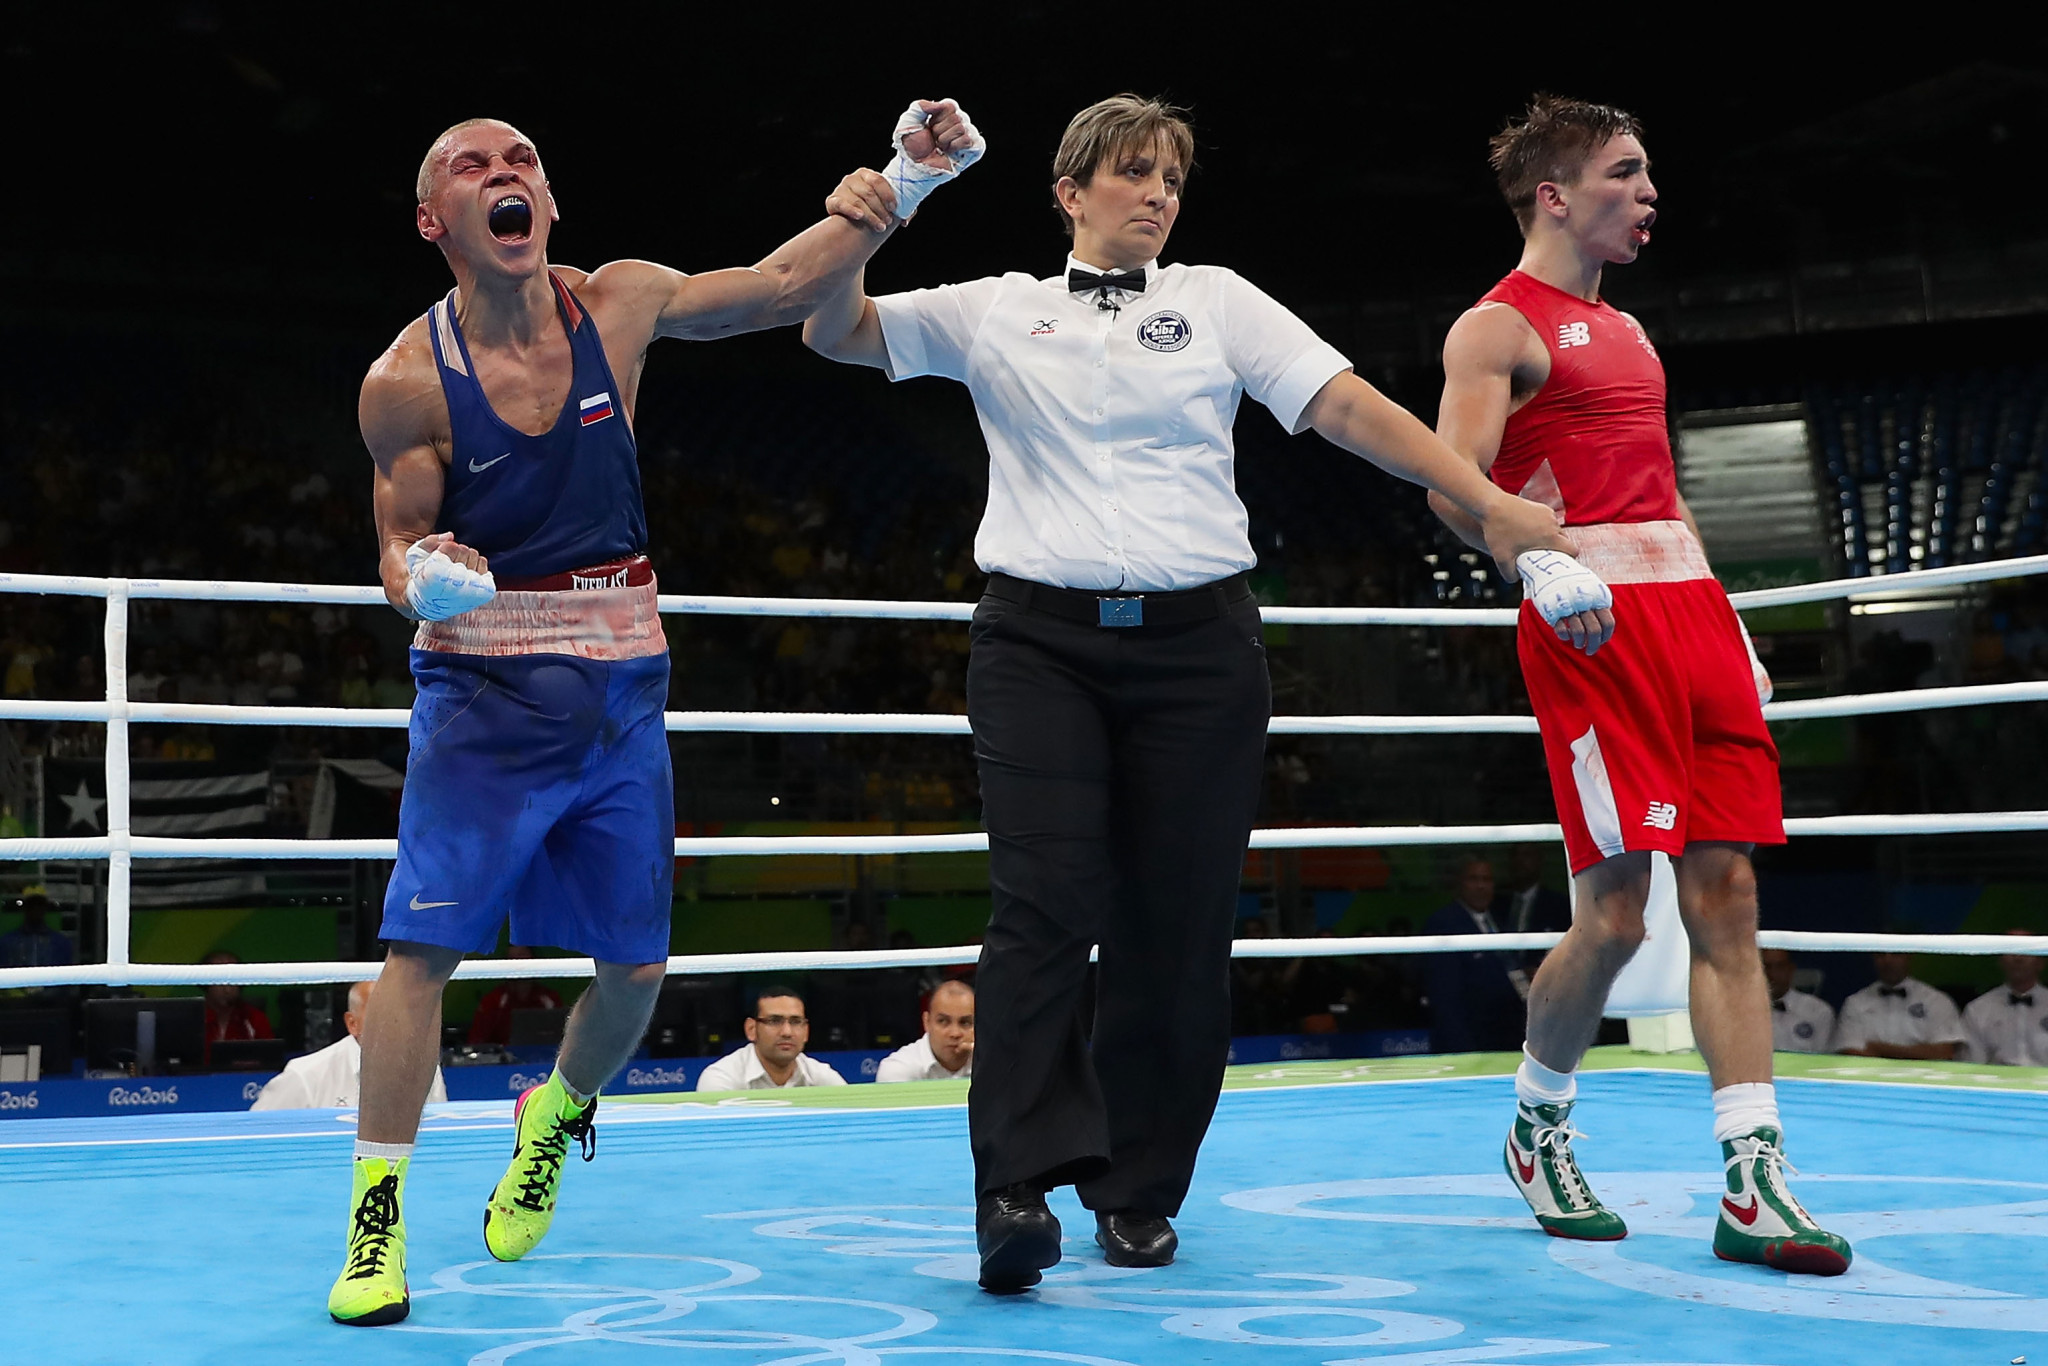 Michael Conlan was involved in one of the most controversial contests at the Rio 2016 Olympic Games after appearing to dominate a quarter-final against Vladimir Nikitin before the Russian was awarded the victory ©Getty Images